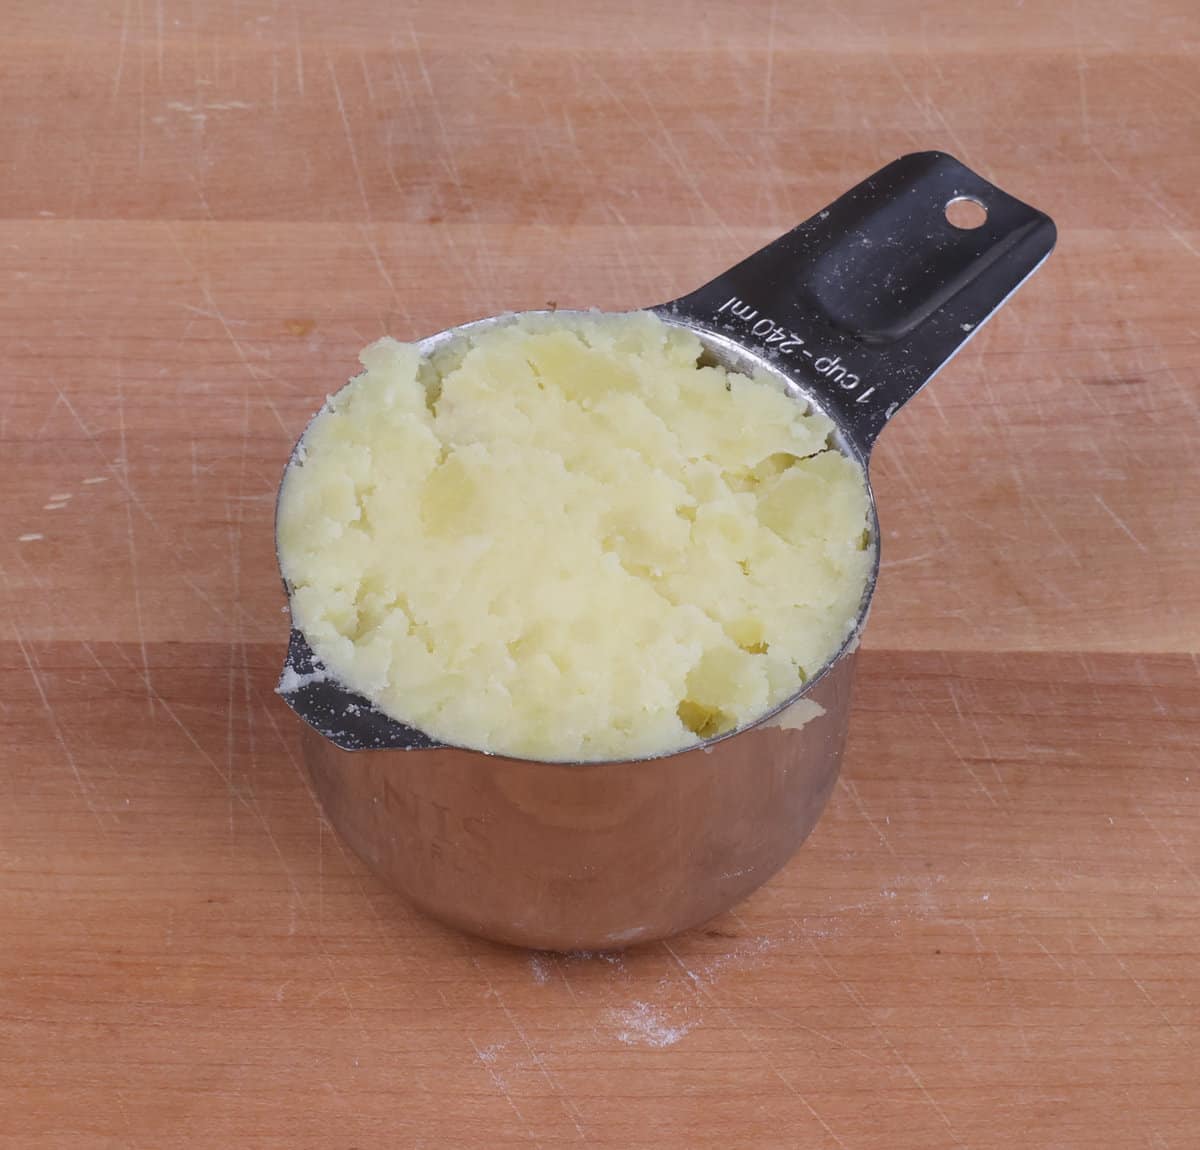 mashed potatoes packed into a measuring cup